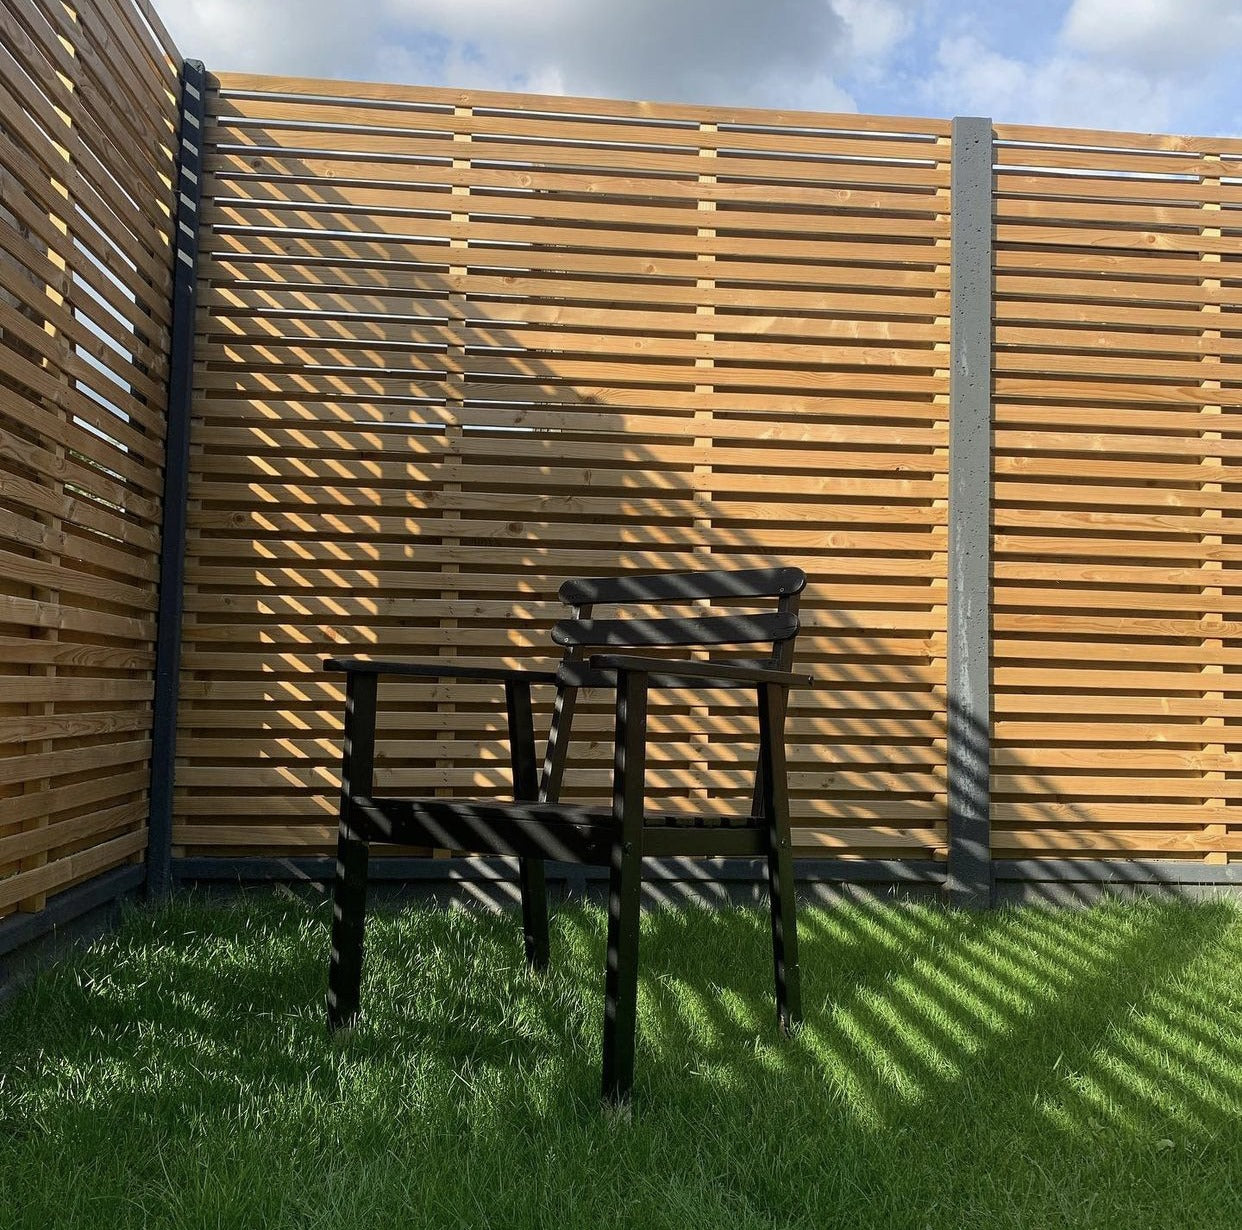 Beautifully fitted double slatted fence installation, with black posts and black garden chair